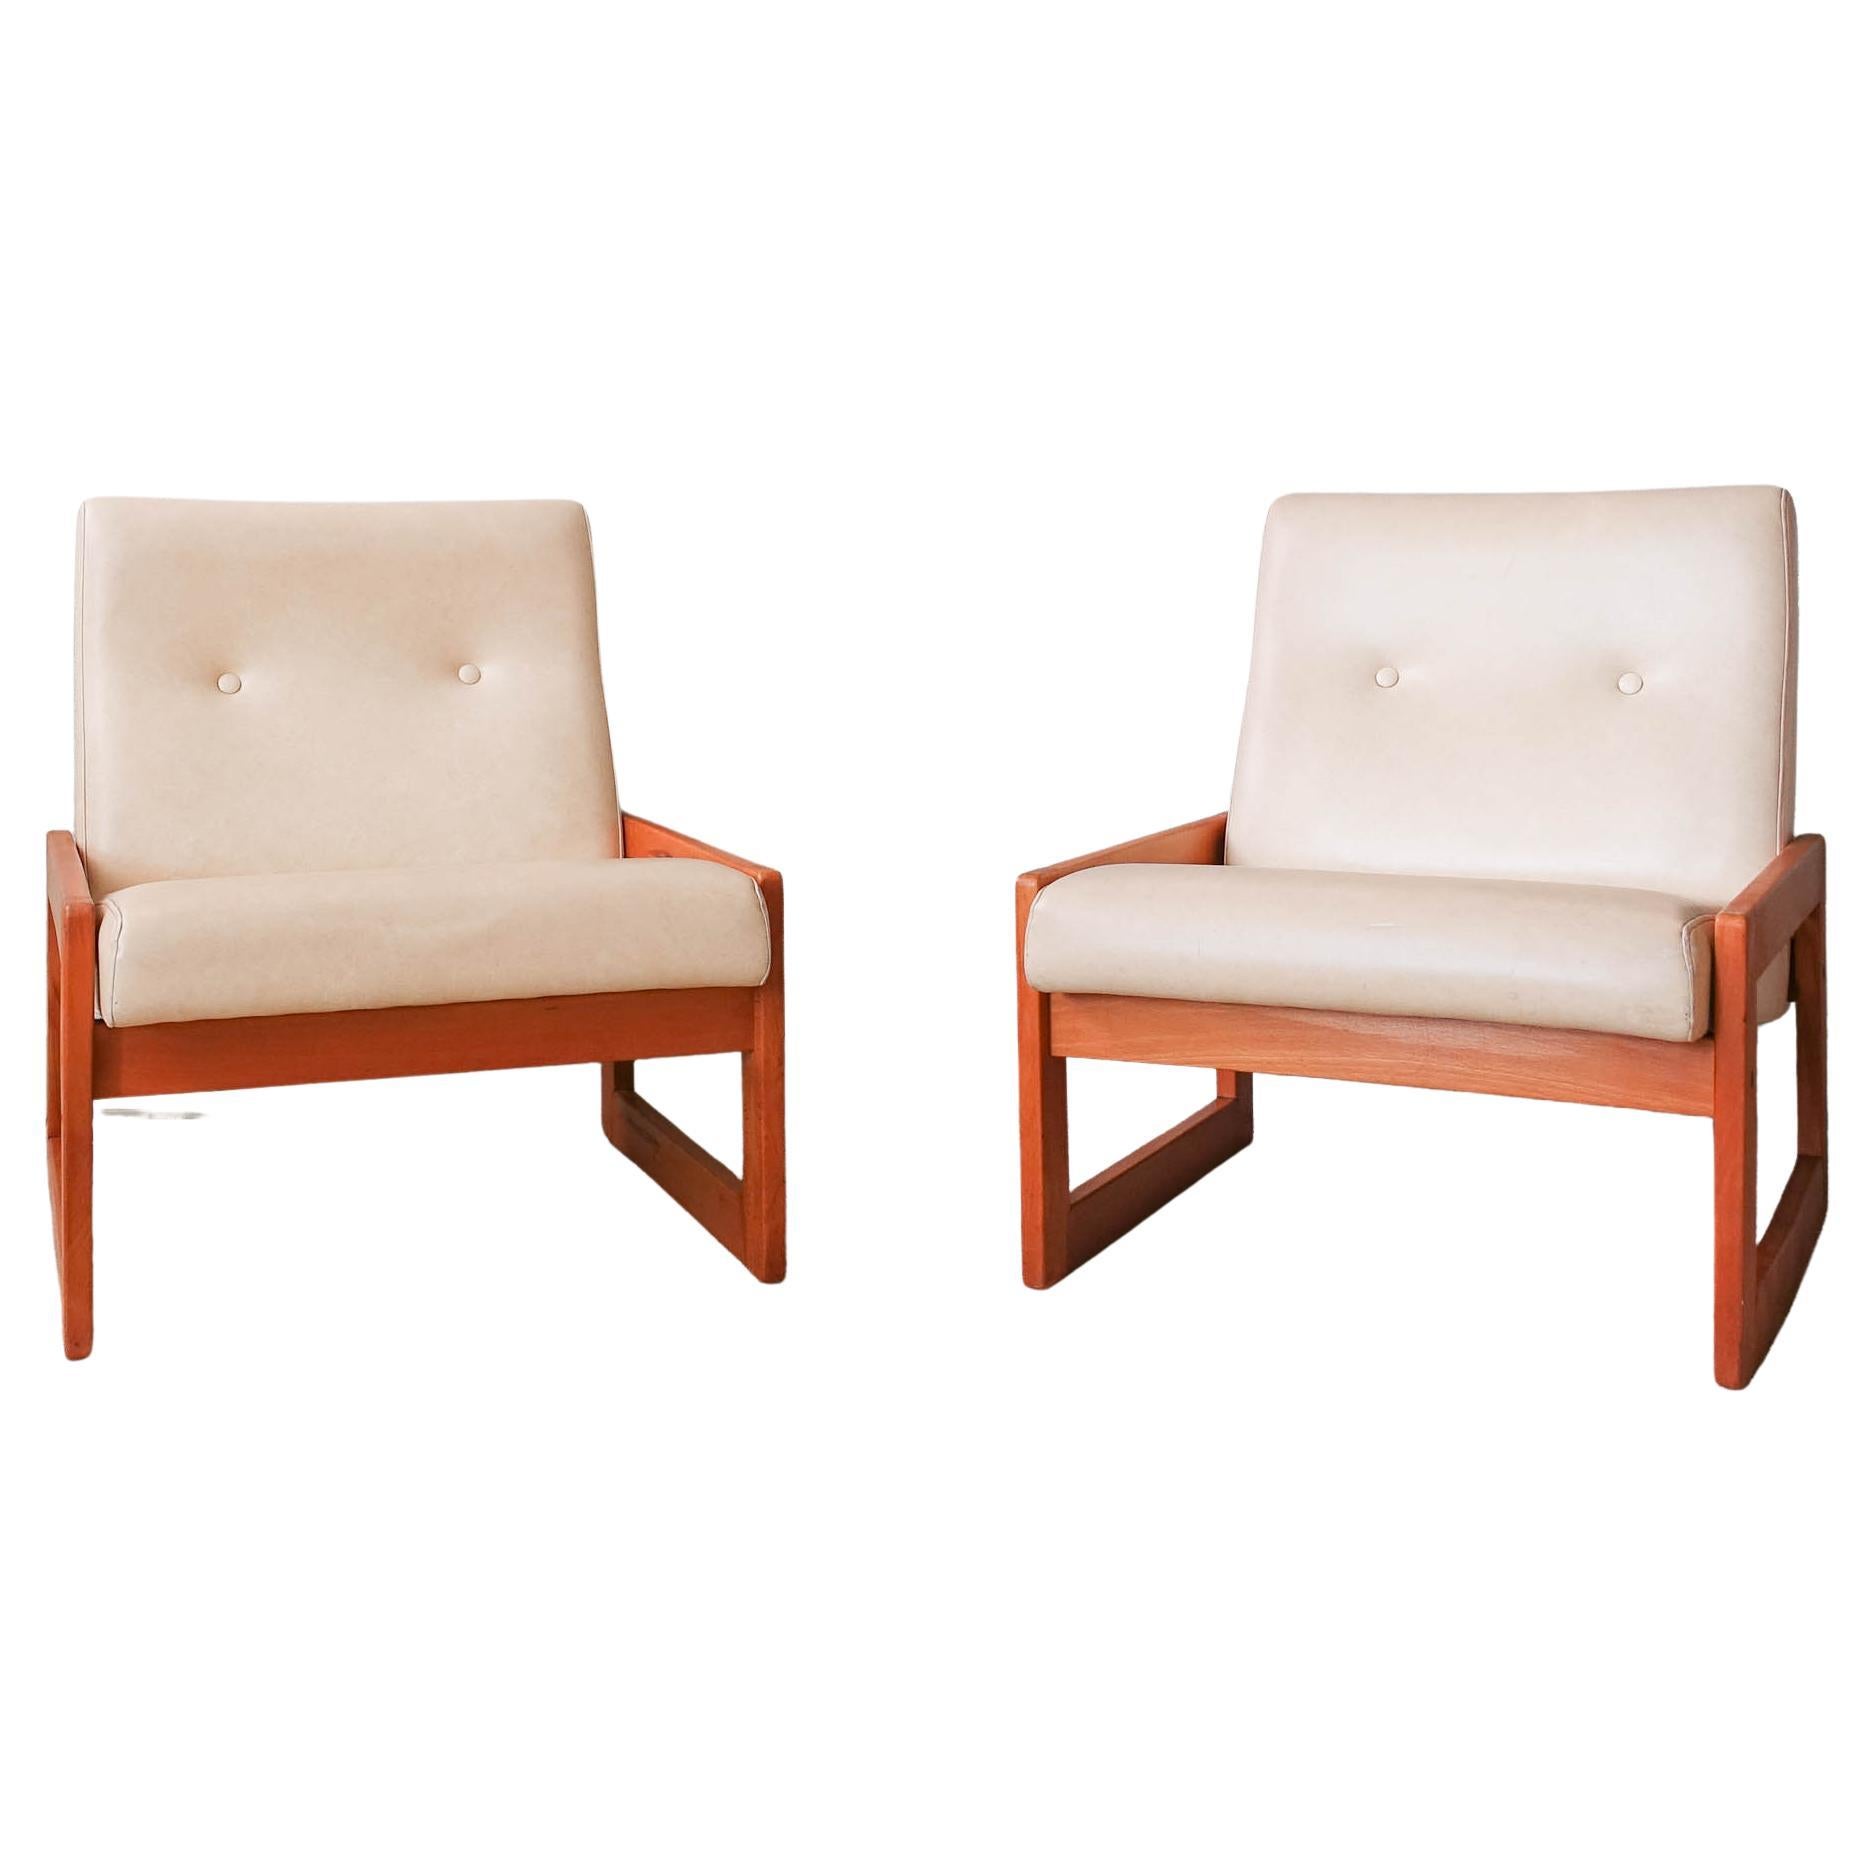 Pair of Easy Chairs, Model Espinho, by José Espinho for Olaio, 1973 For Sale